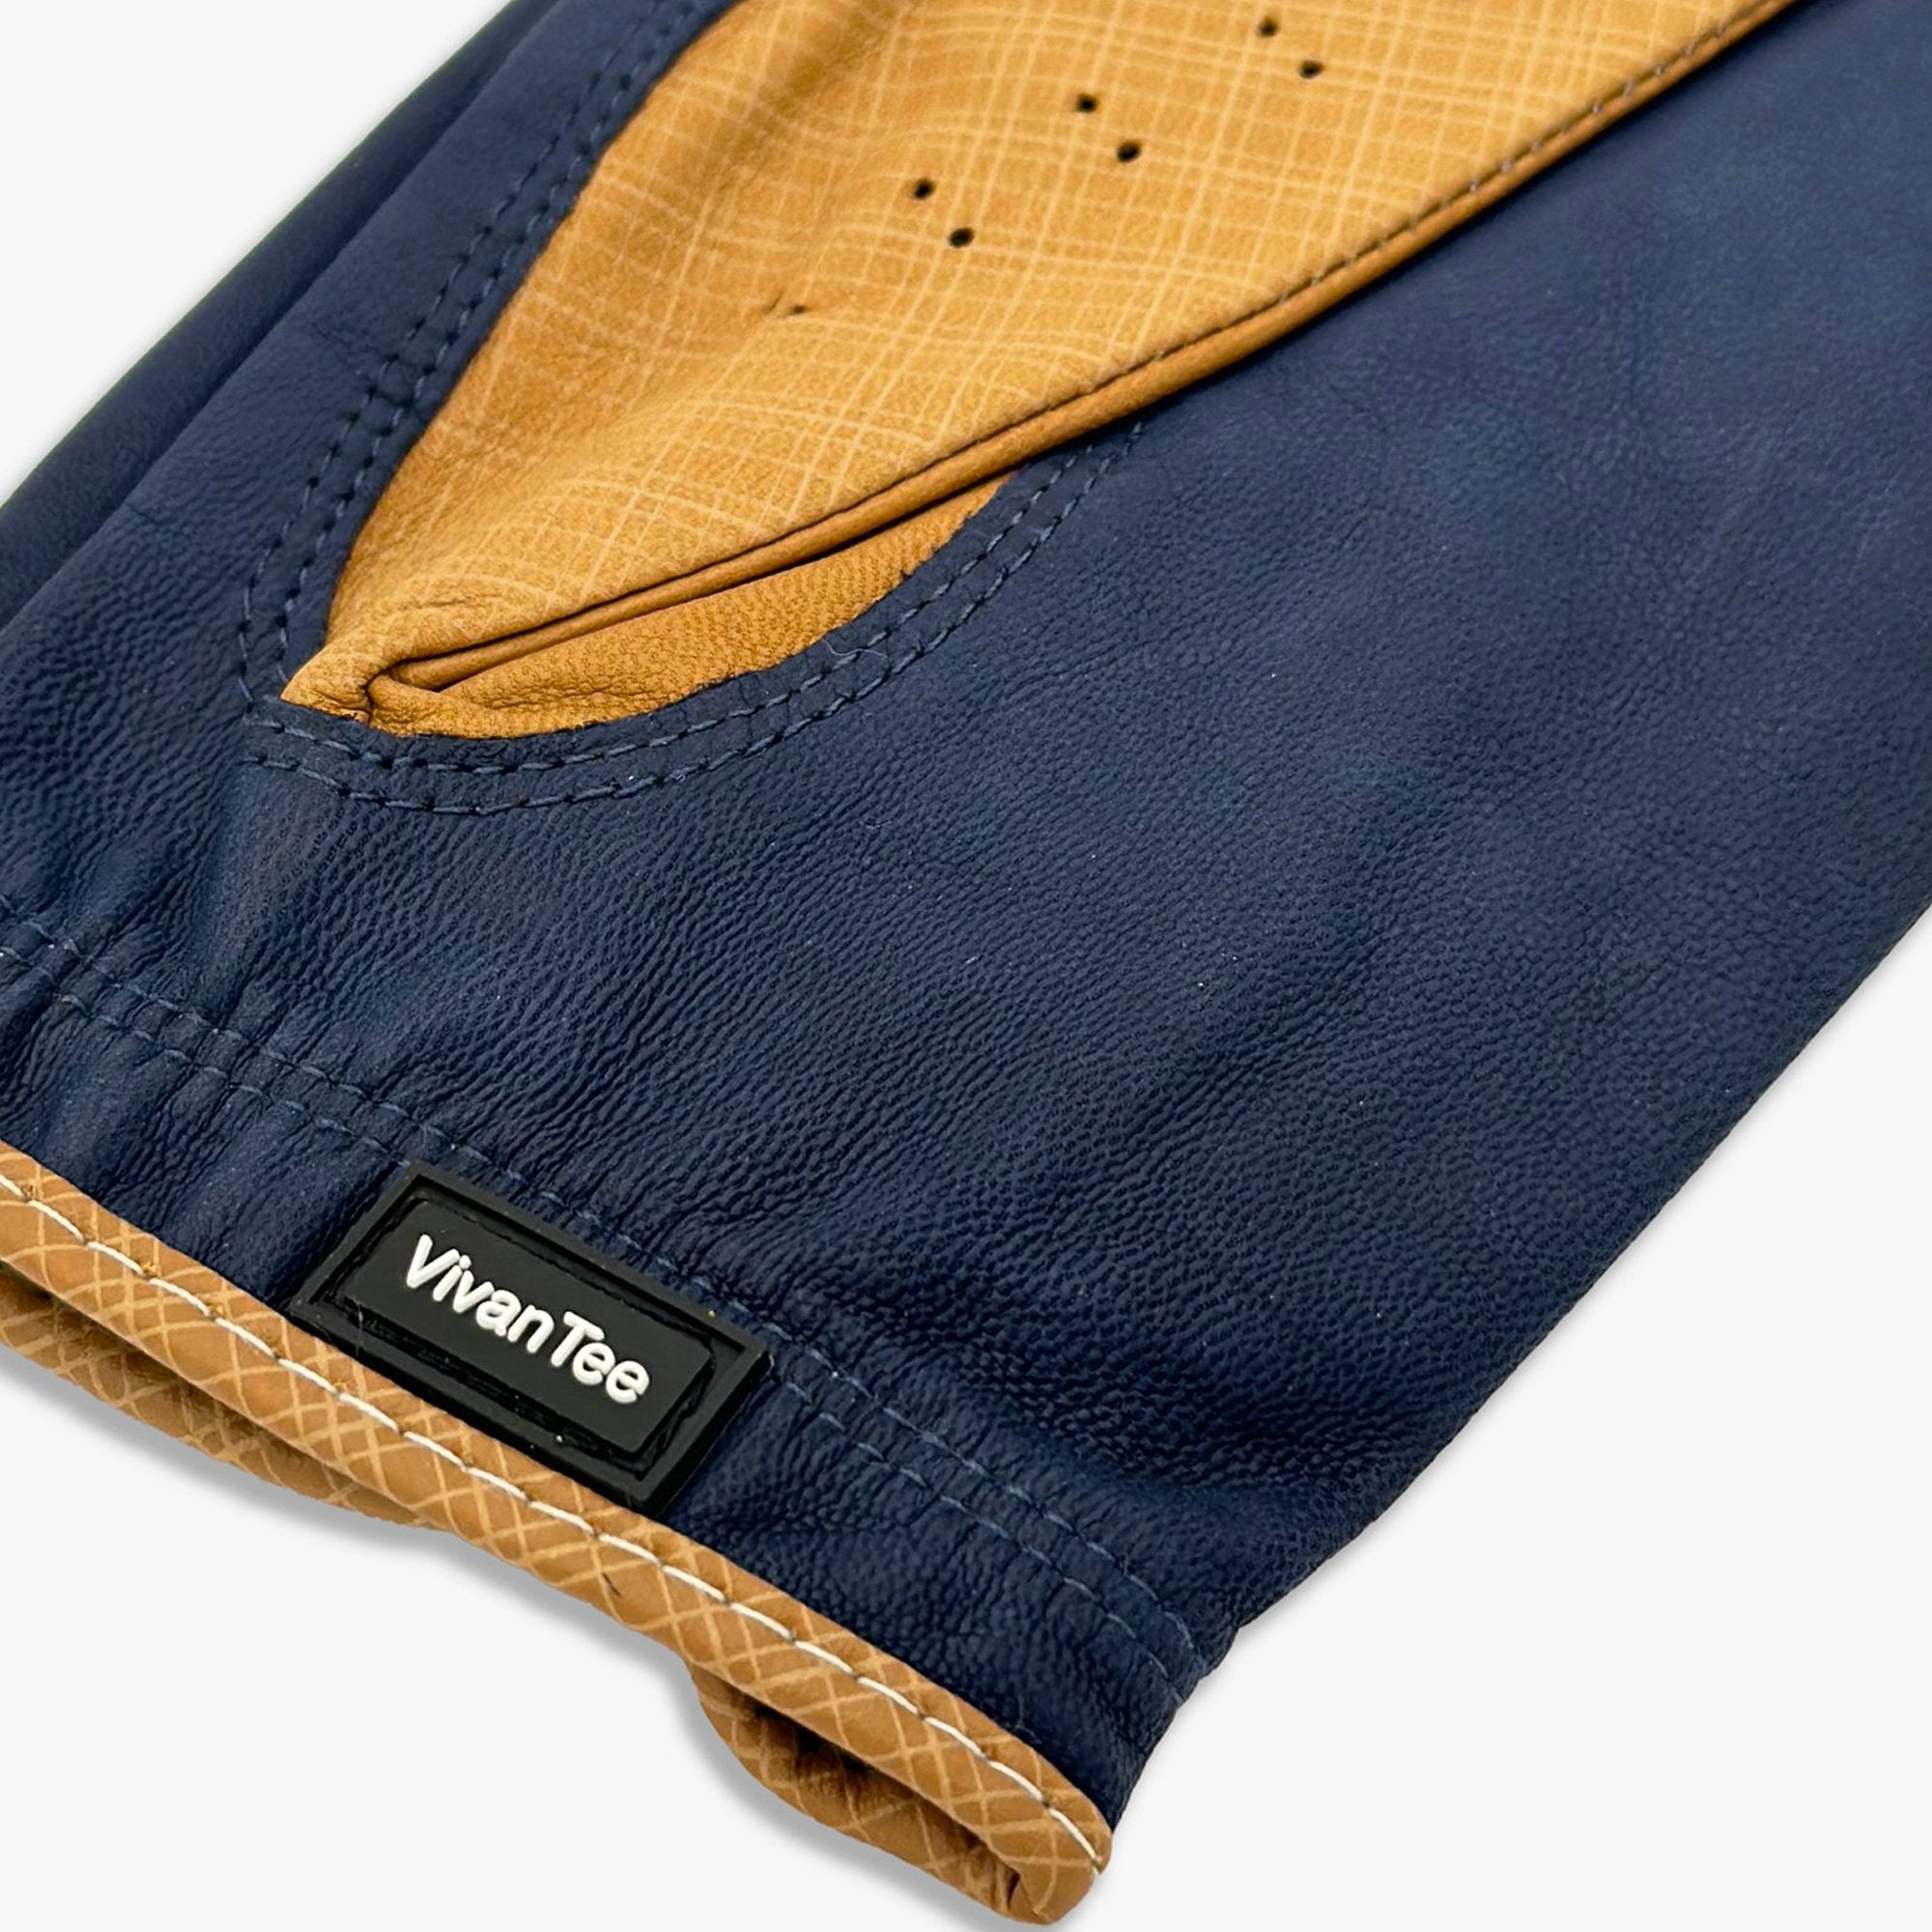 Close up VivanTee Golf pull tab on a navy blue and brown golf glove.